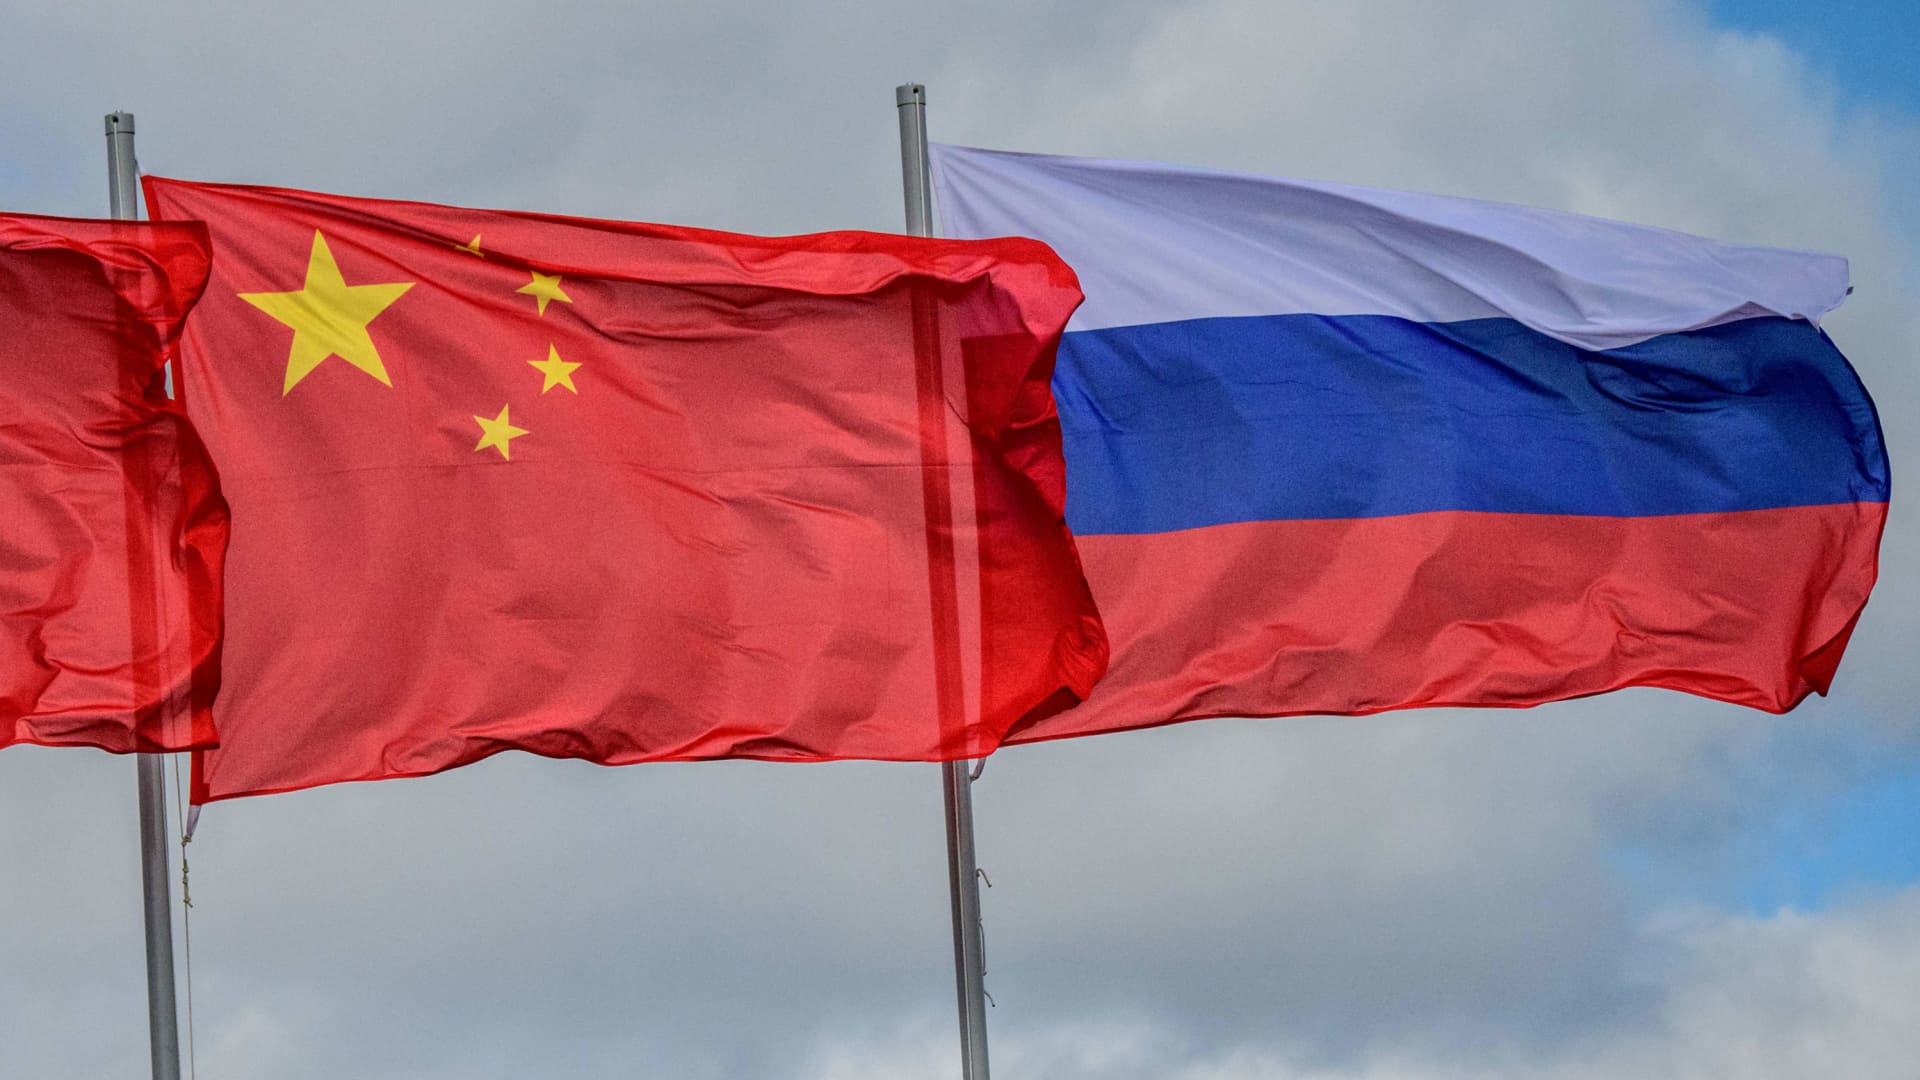 The flags of China and Russia